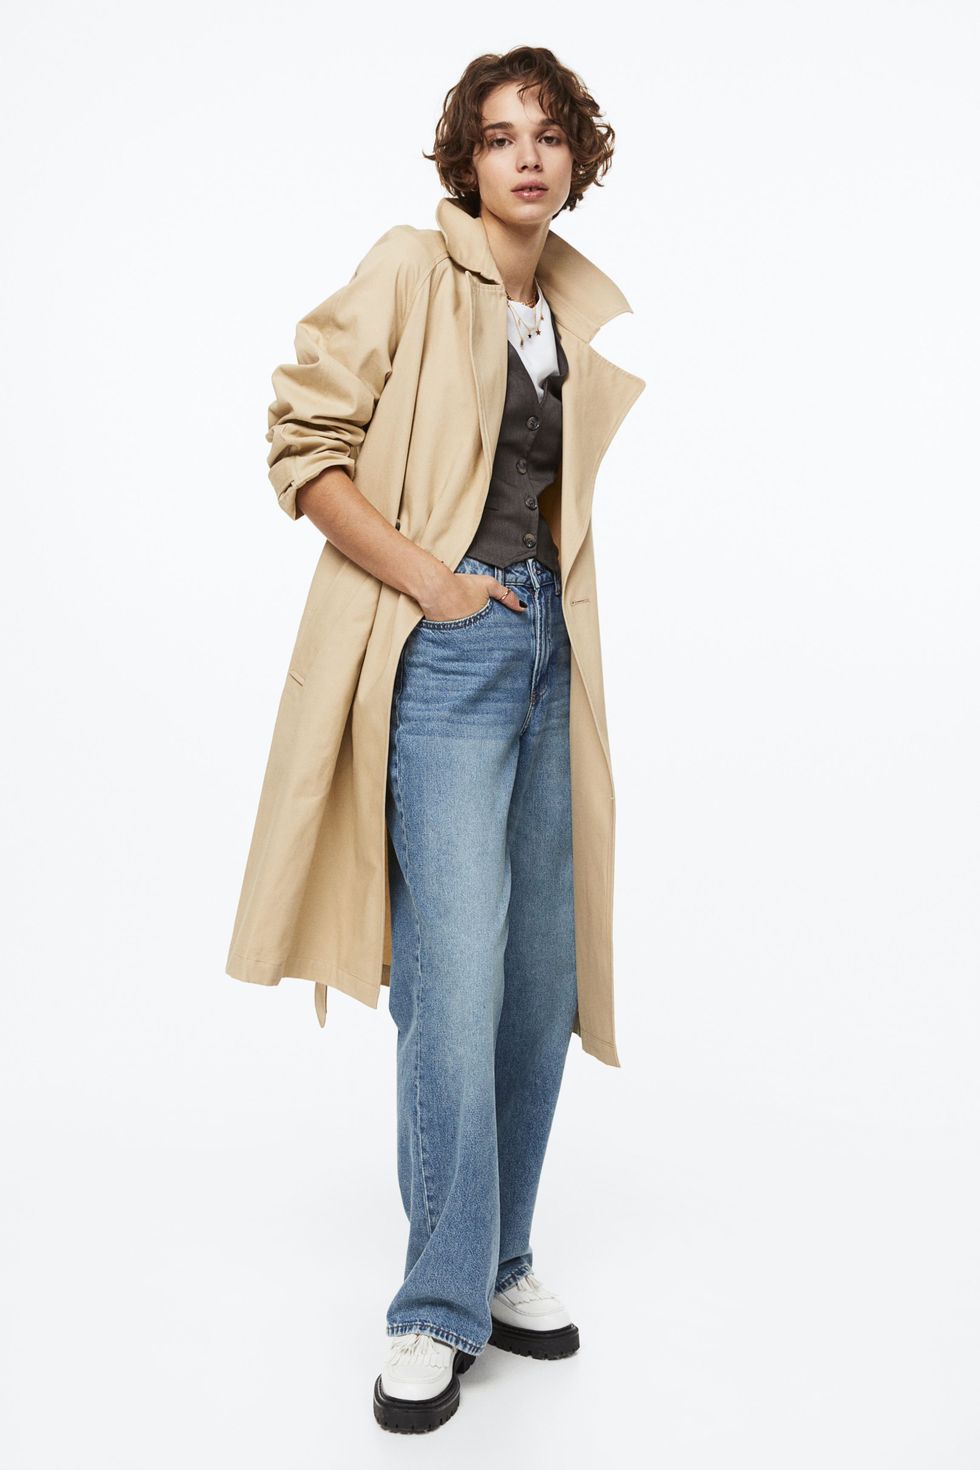 Best new spring coats - spring fashion